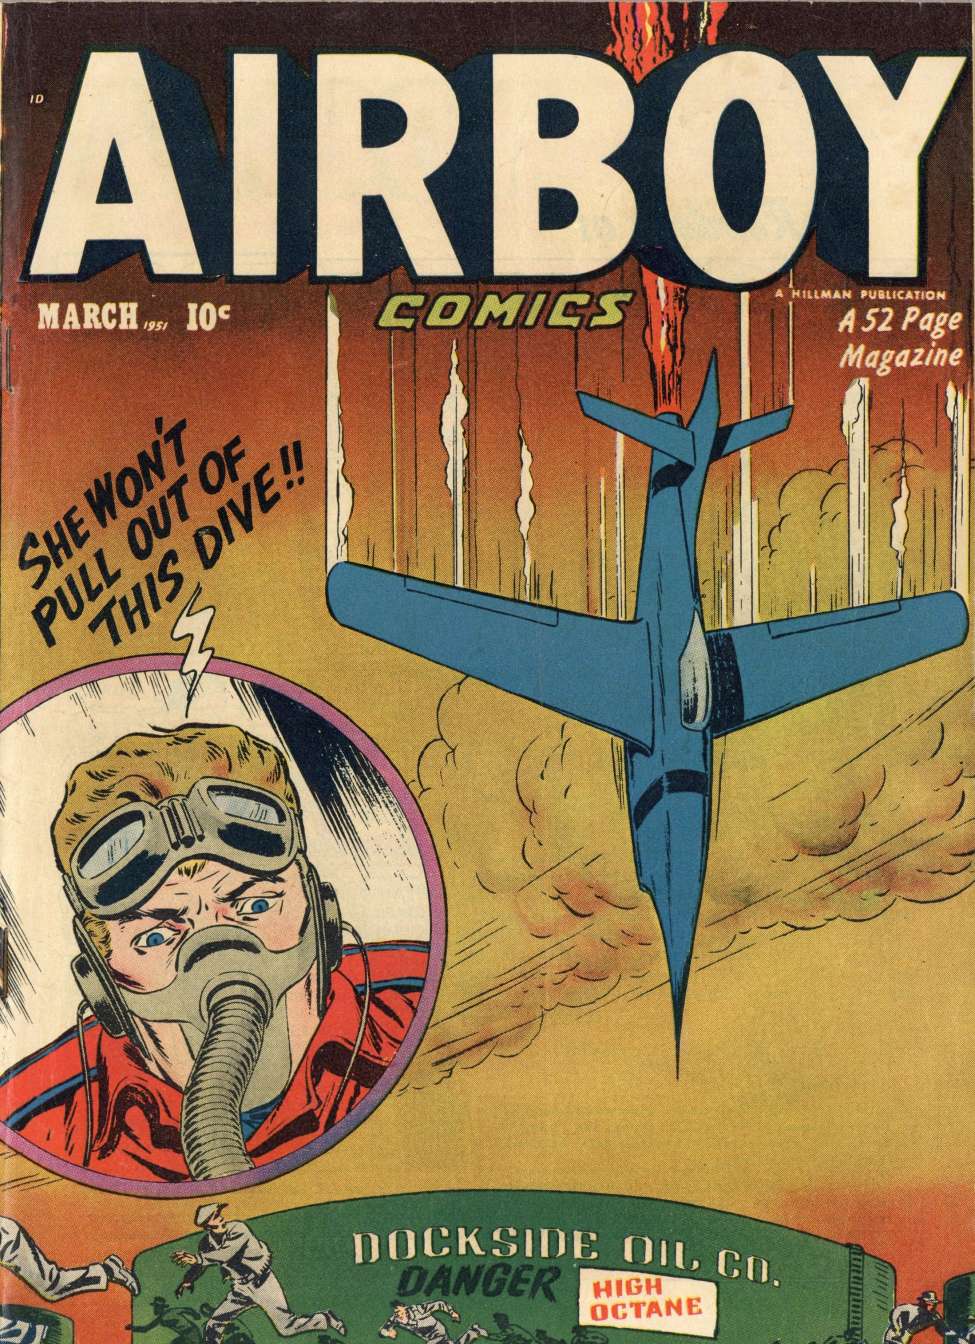 Book Cover For Airboy Comics v8 2